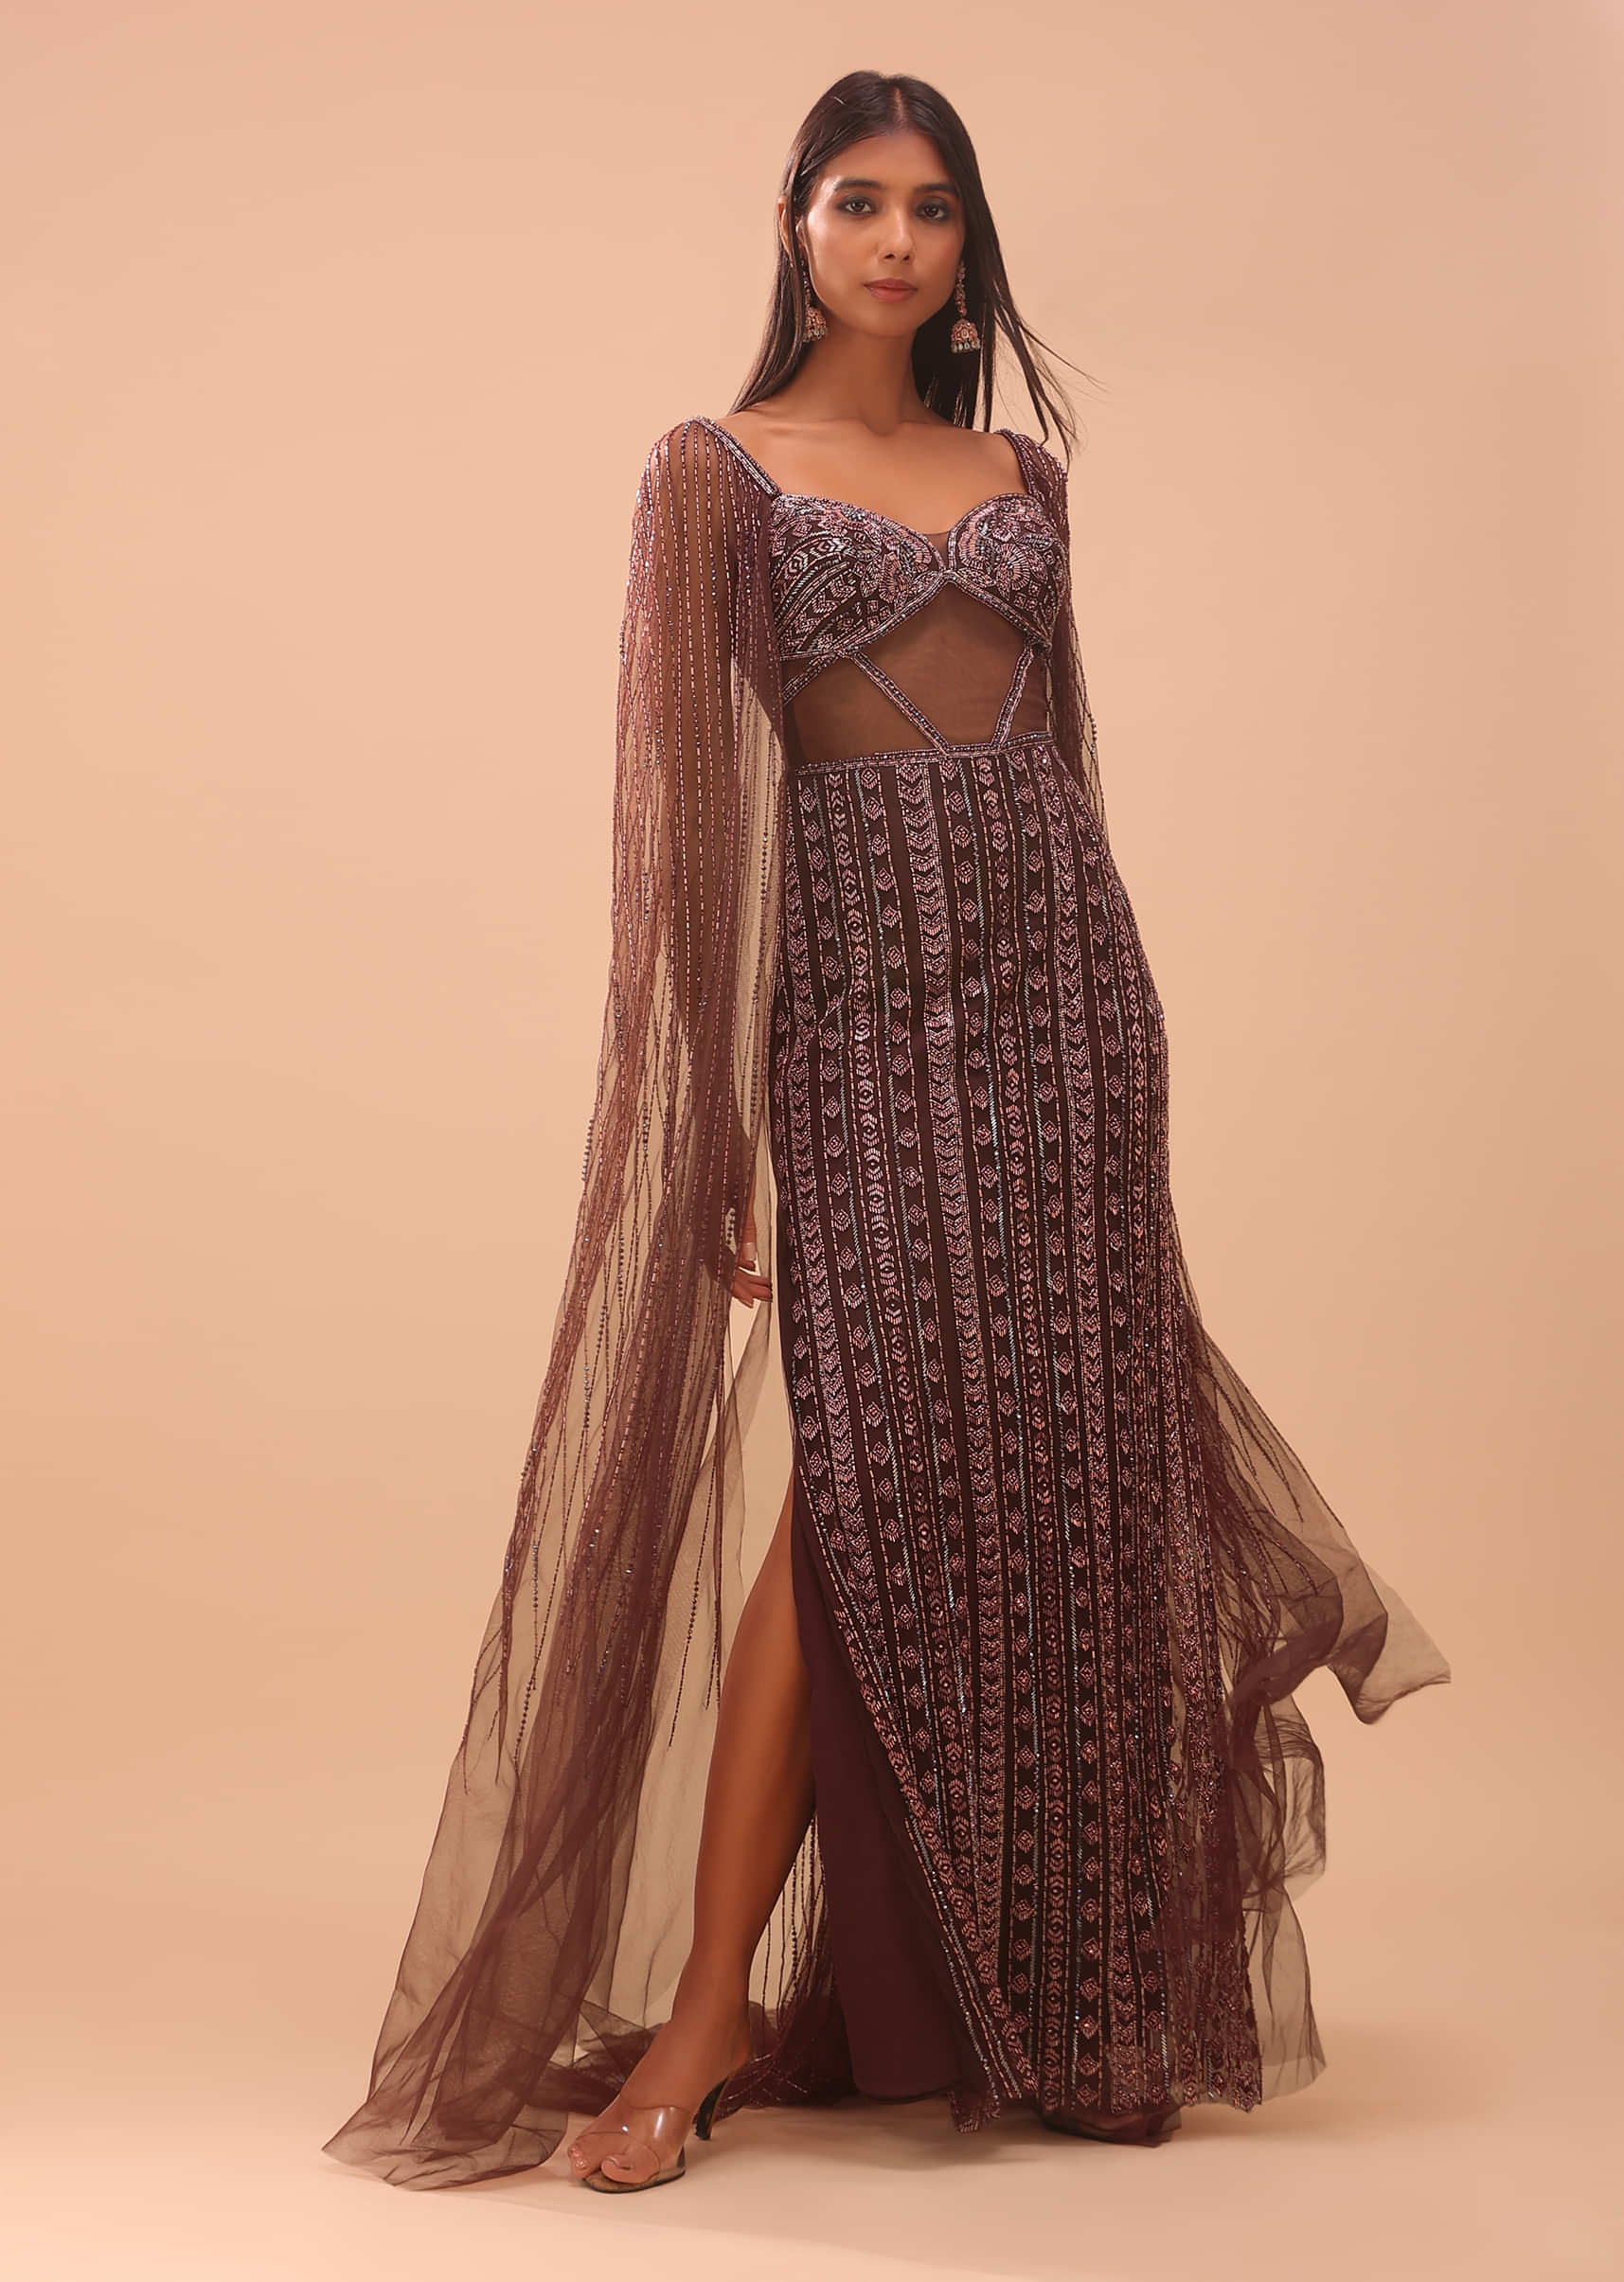 Chocolate Brown Gown In Net With Dreamy Cape Sleeves - NOOR 2022